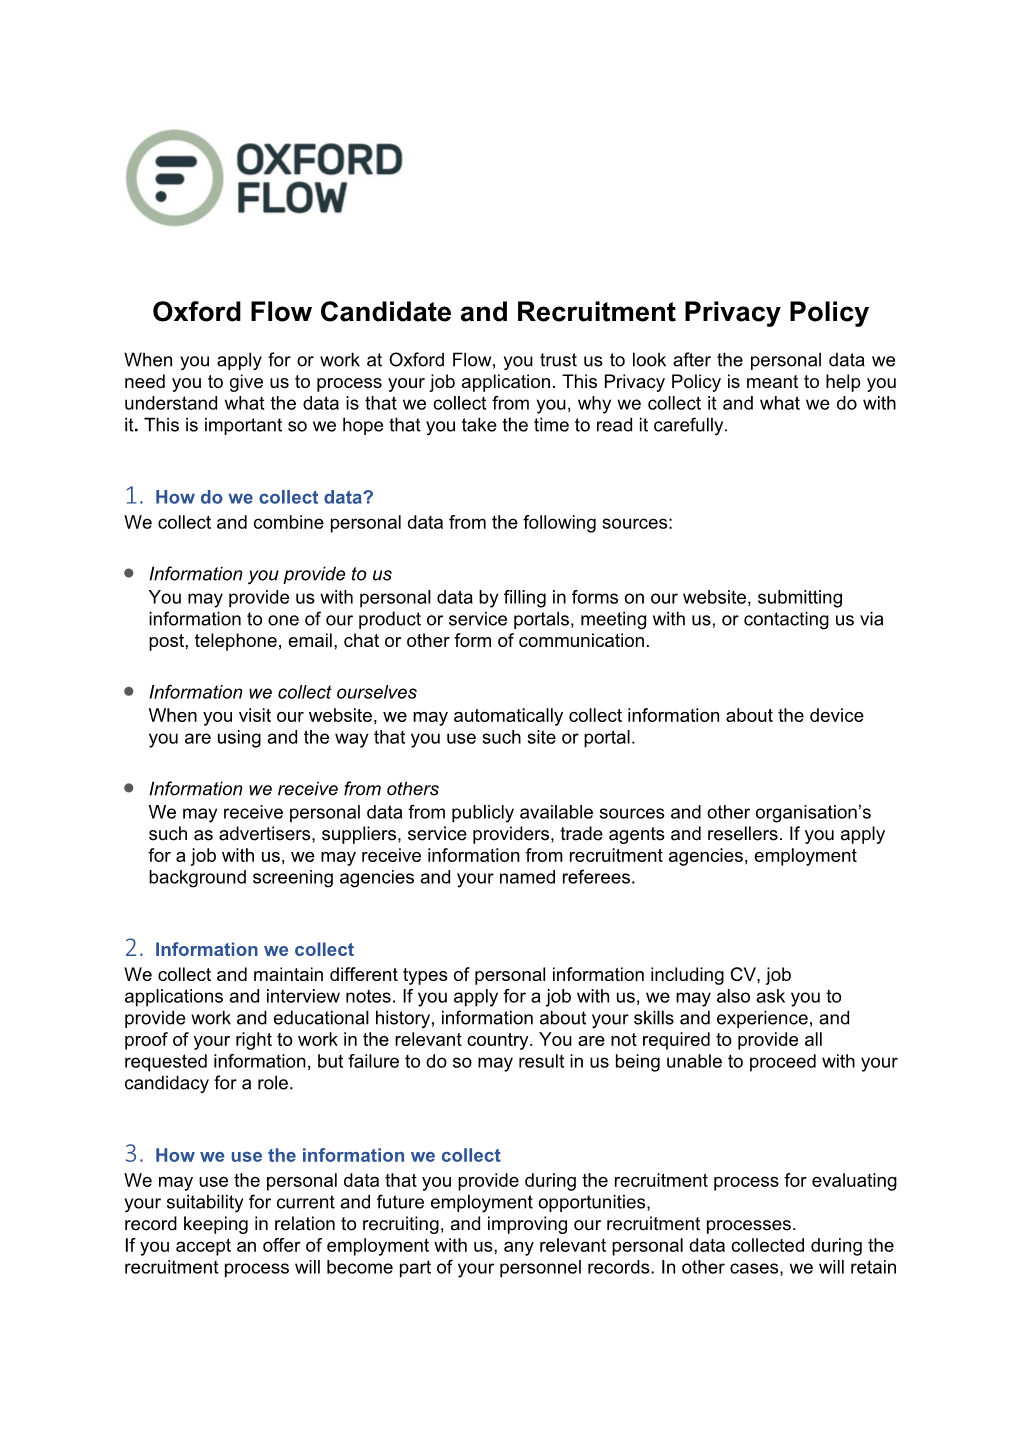 Oxford Flowcandidate and Recruitment Privacy Policy